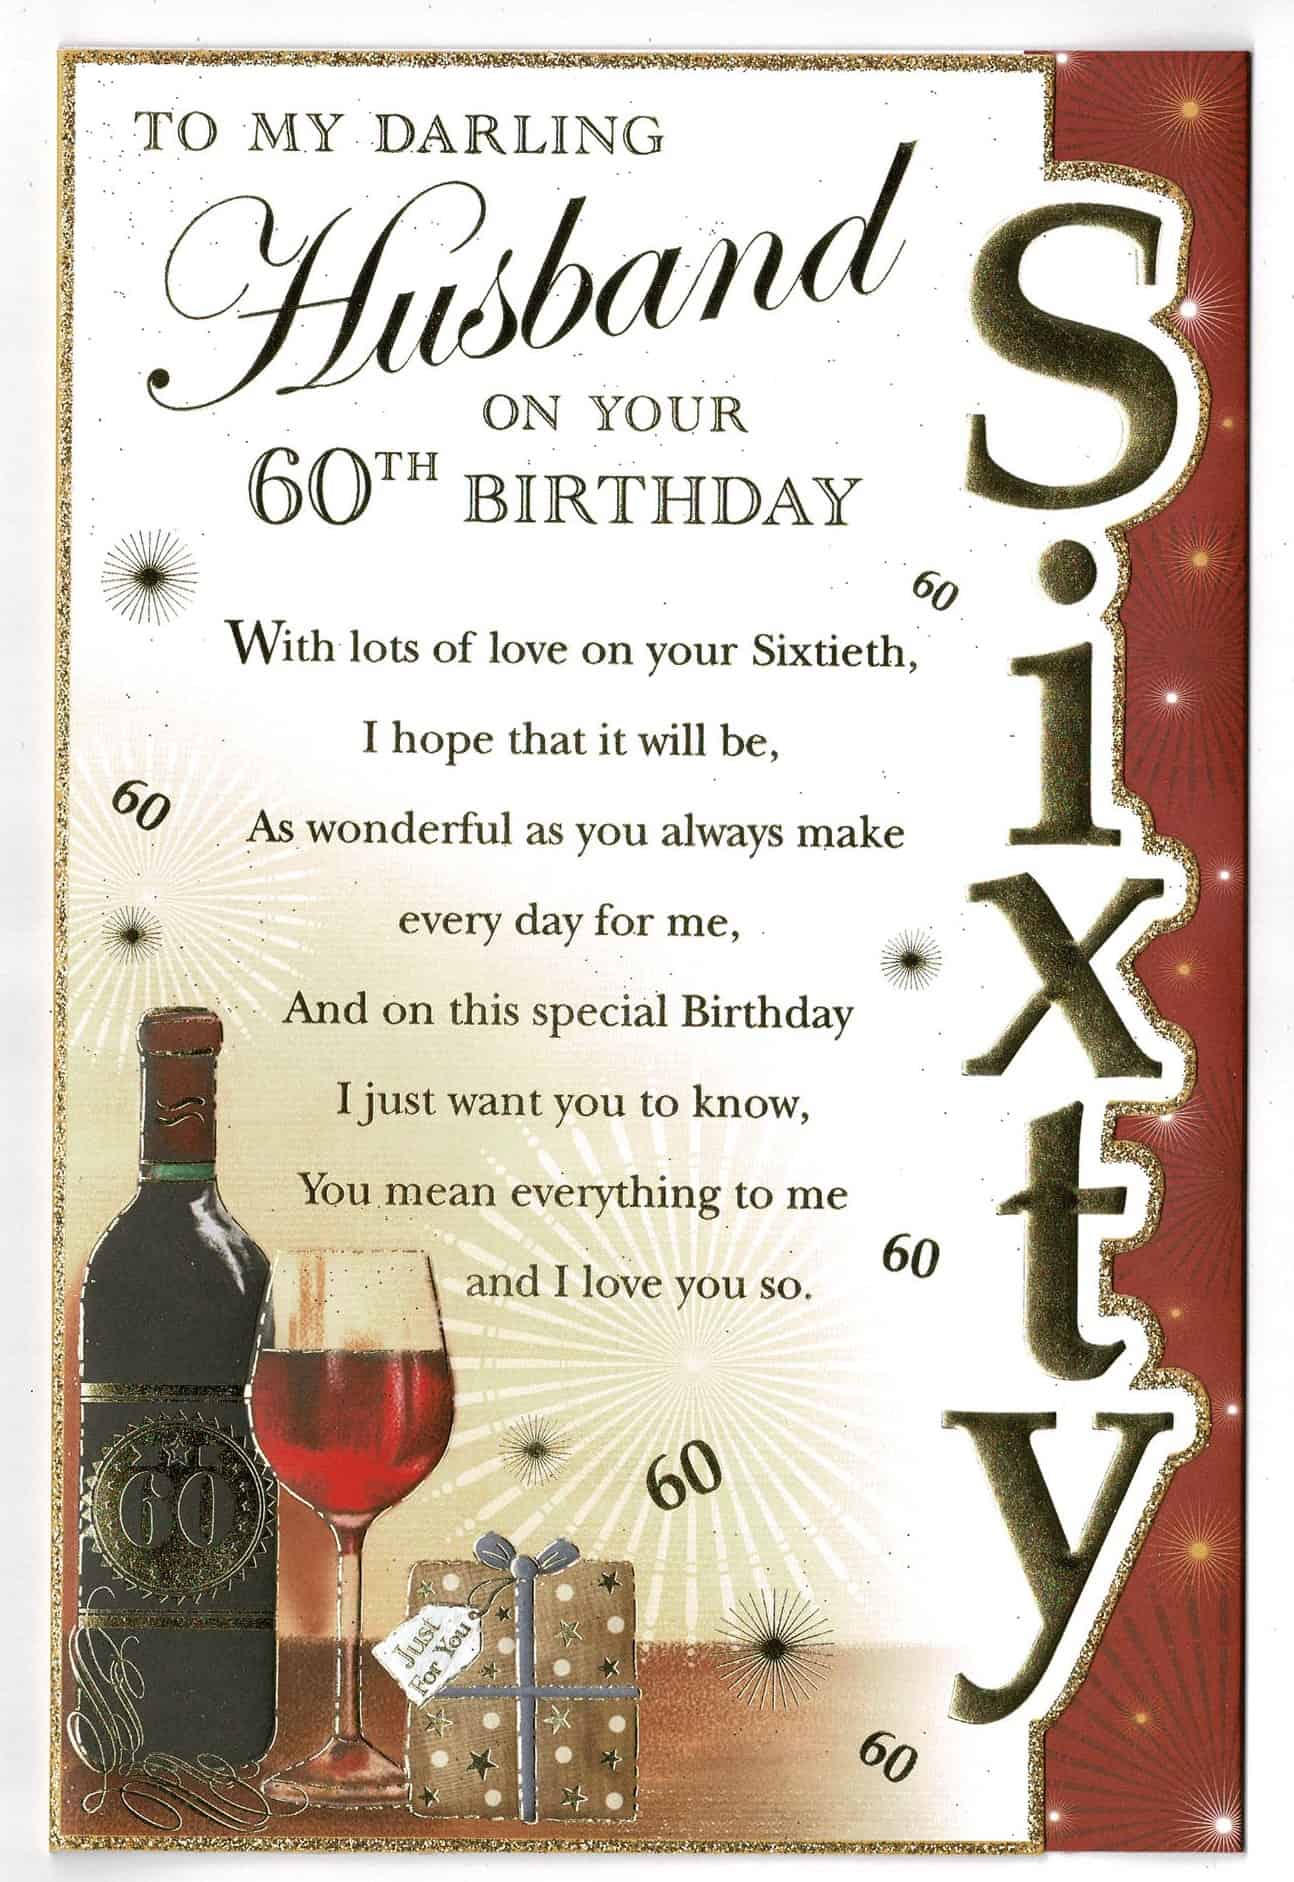 Great Husband 60th Birthday Card of all time Check it out now!